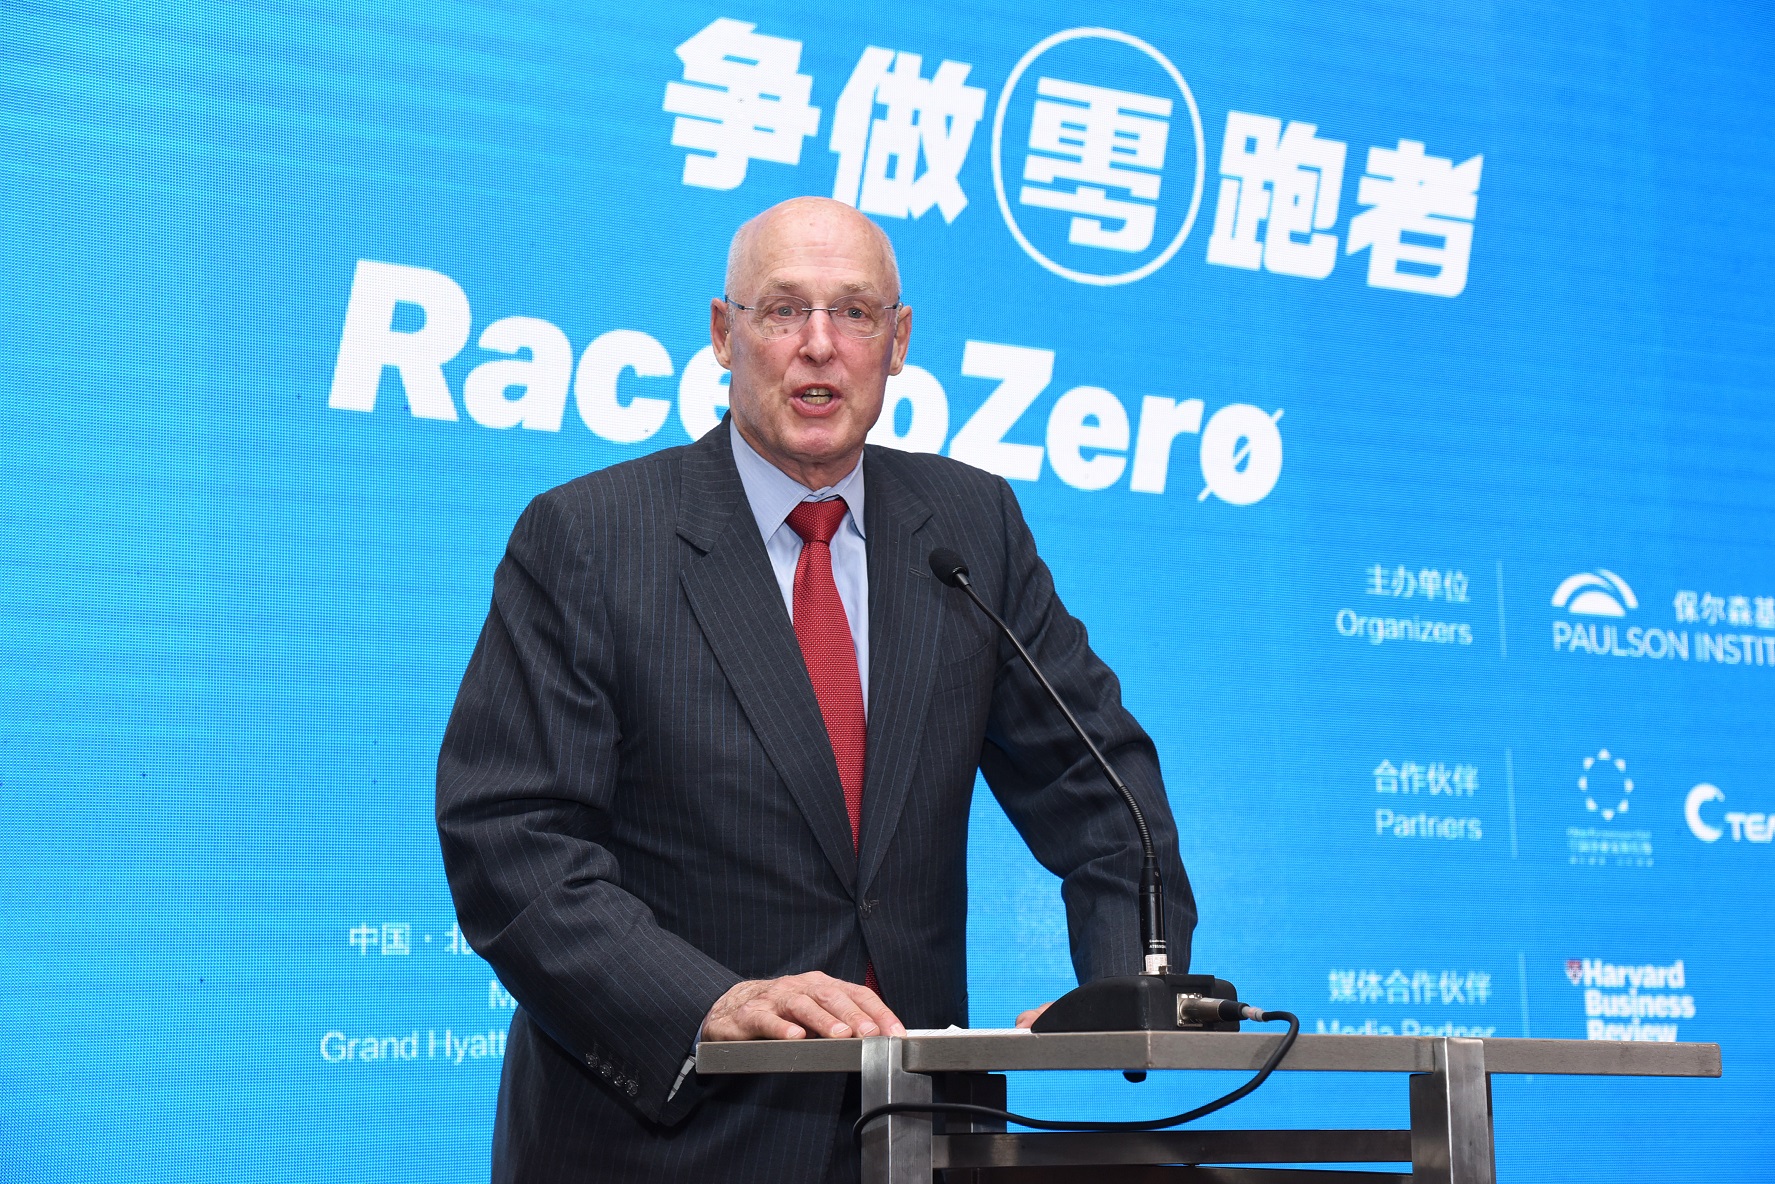 Henry M. Paulson, Jr., chairman of the Paulson Institute, addresses the launching ceremony of the Race to Zero initiative in Beijing on March 23. [Photo courtesy of the Paulson Institute]